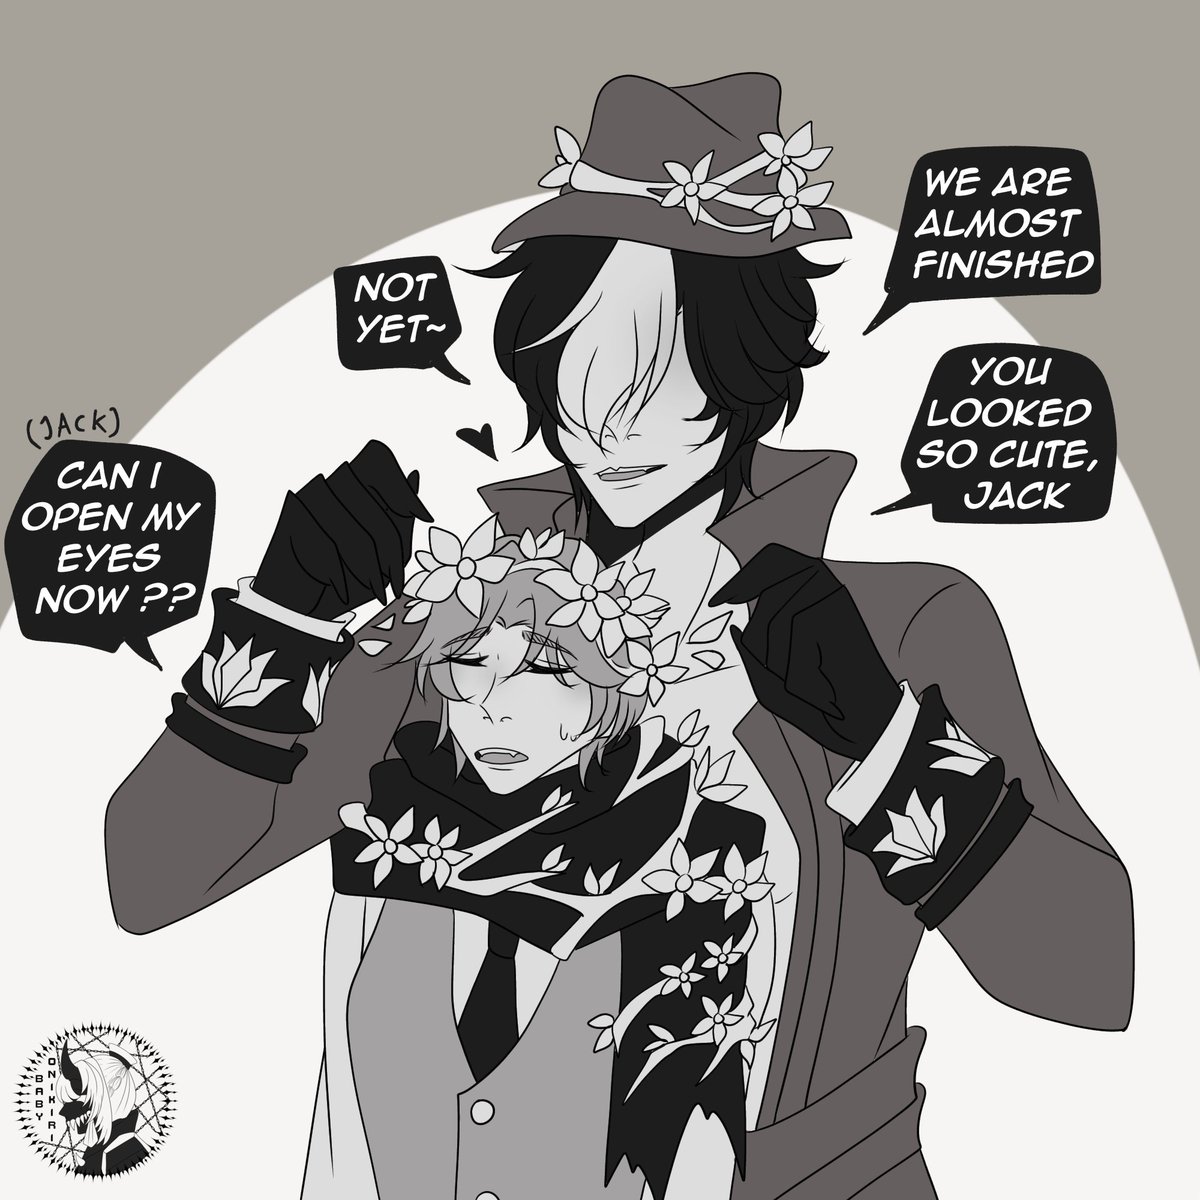 Manor AU. -Jack Day 3-
'Flower Crown' with Tuberose
#JackTheRipper #ripperjack #リパジャ #RipperJack